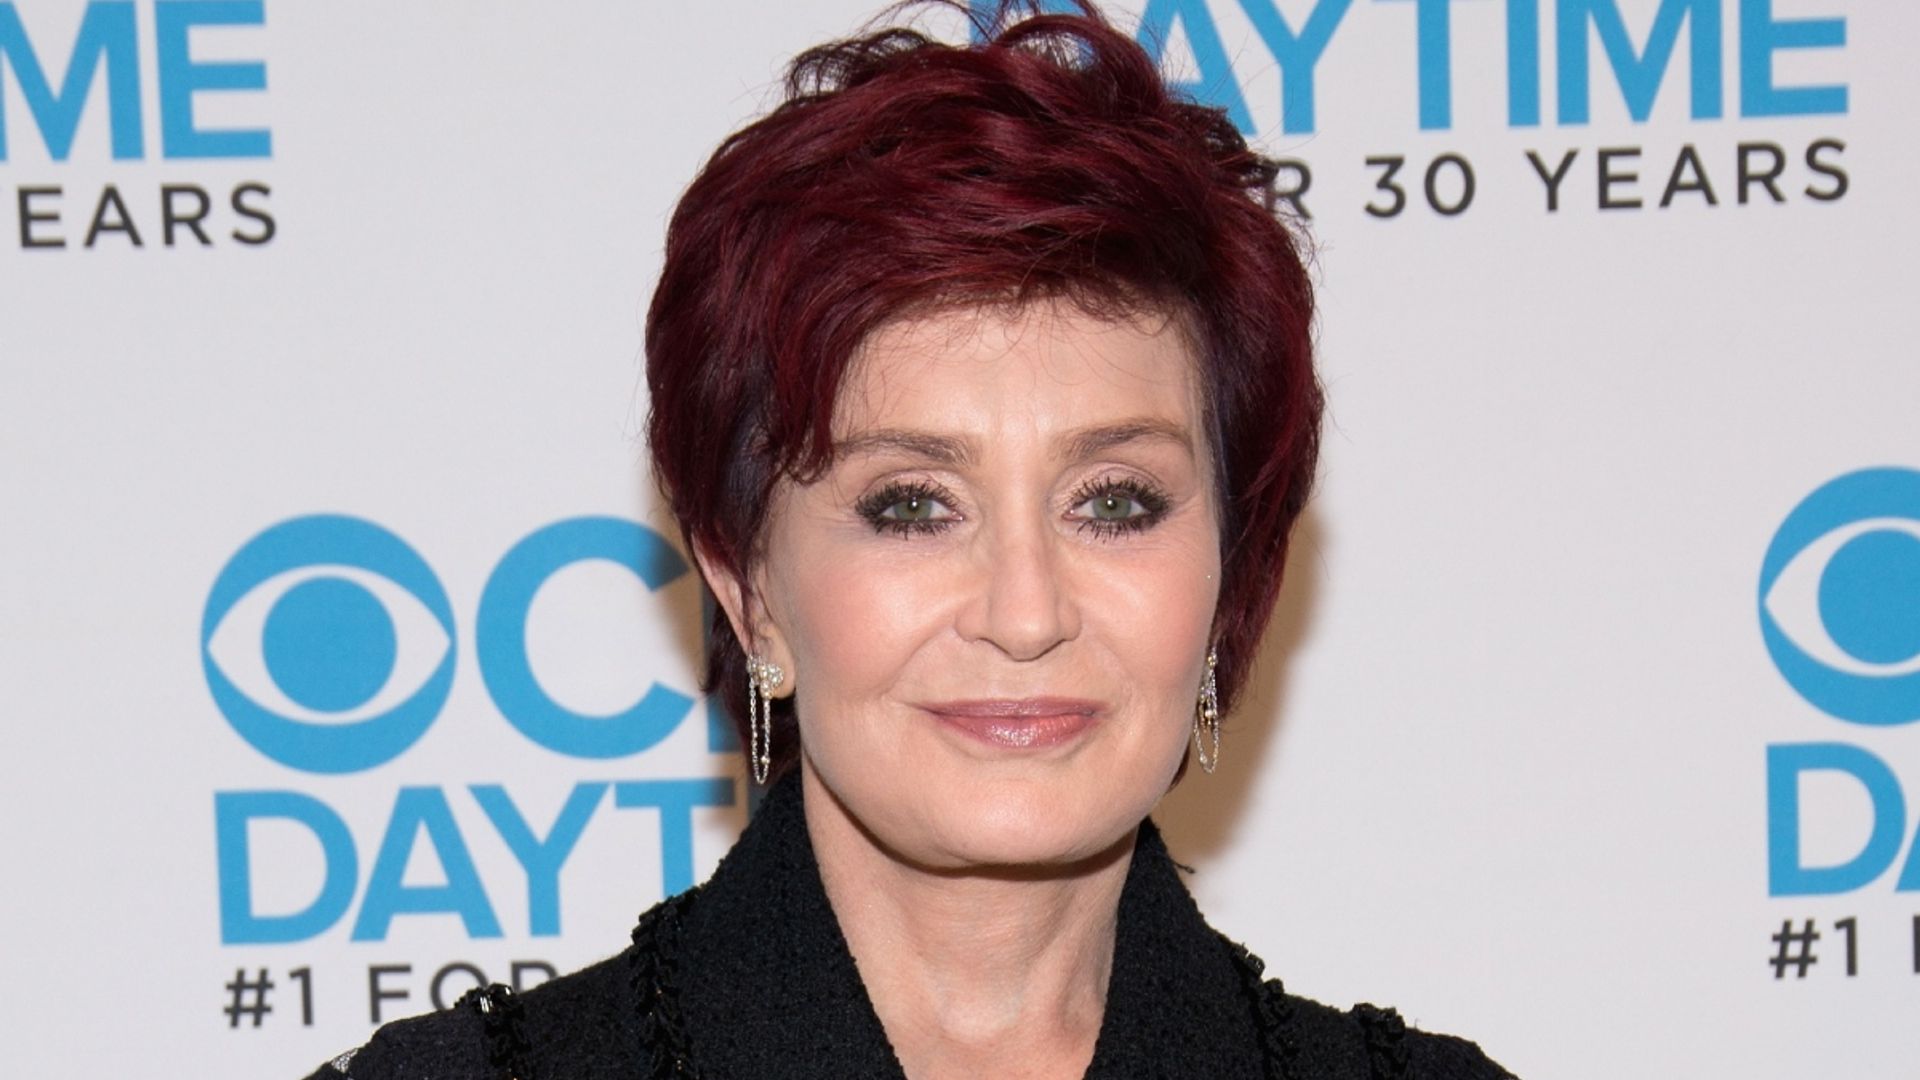 Sharon Osbourne announces television comeback as she returns to the UK